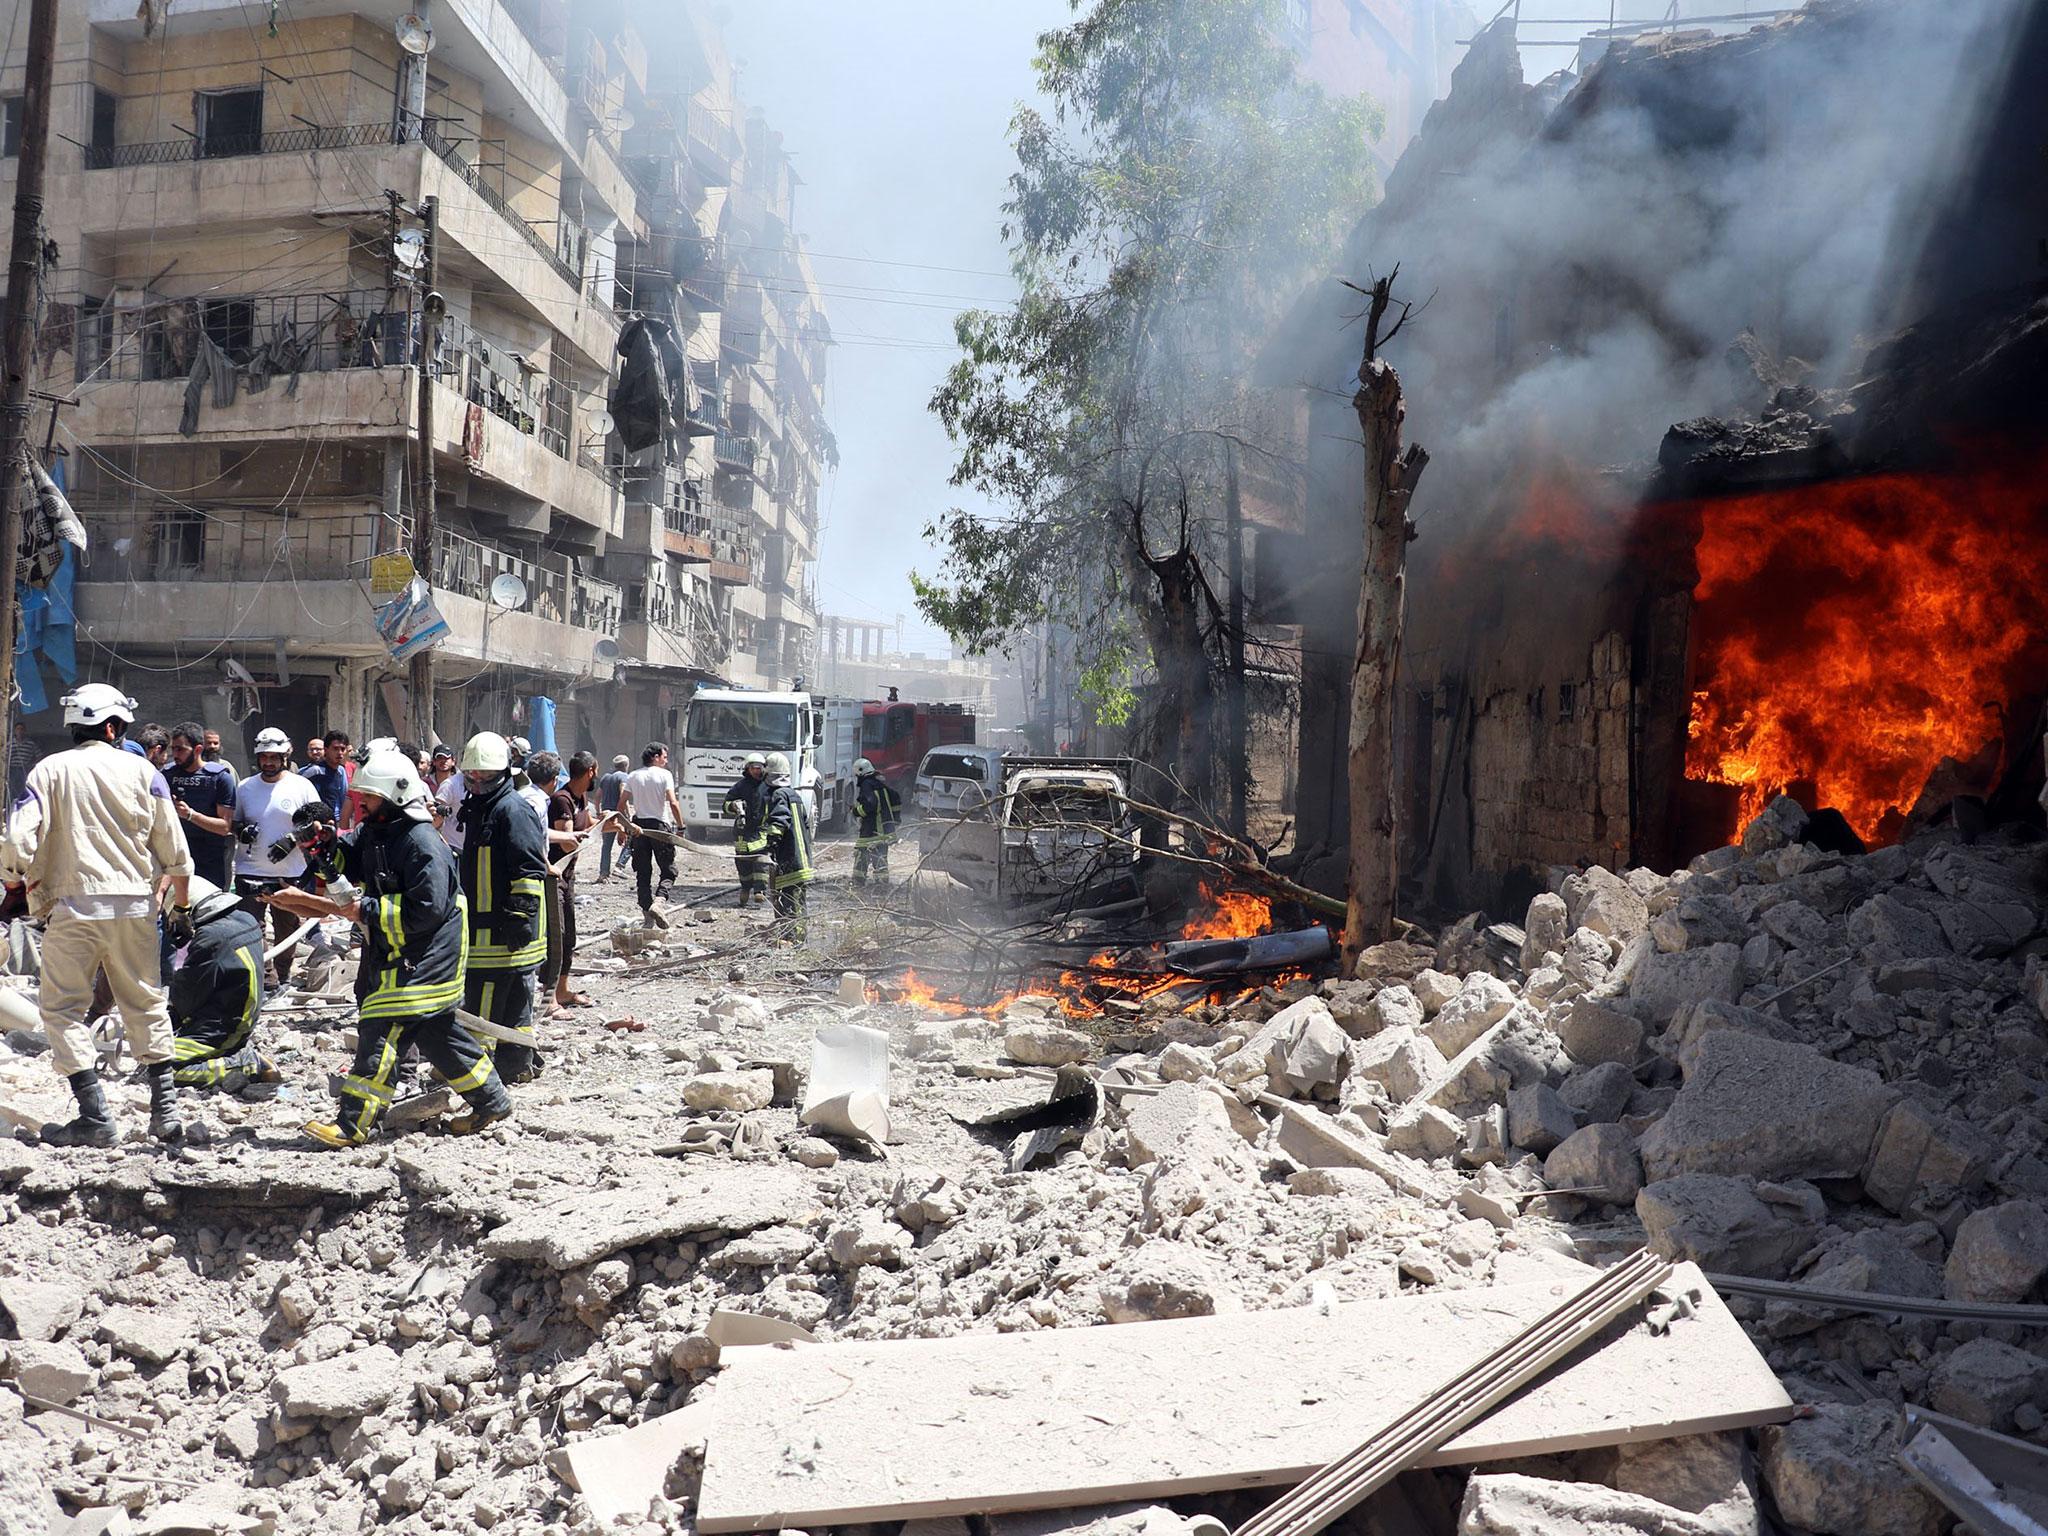 Smoke rises over the wreckage of buildings after a suspected barrel bomb attacks on Beyan hospital and a bazaar in Aleppo, Syria on 8 June, 2016